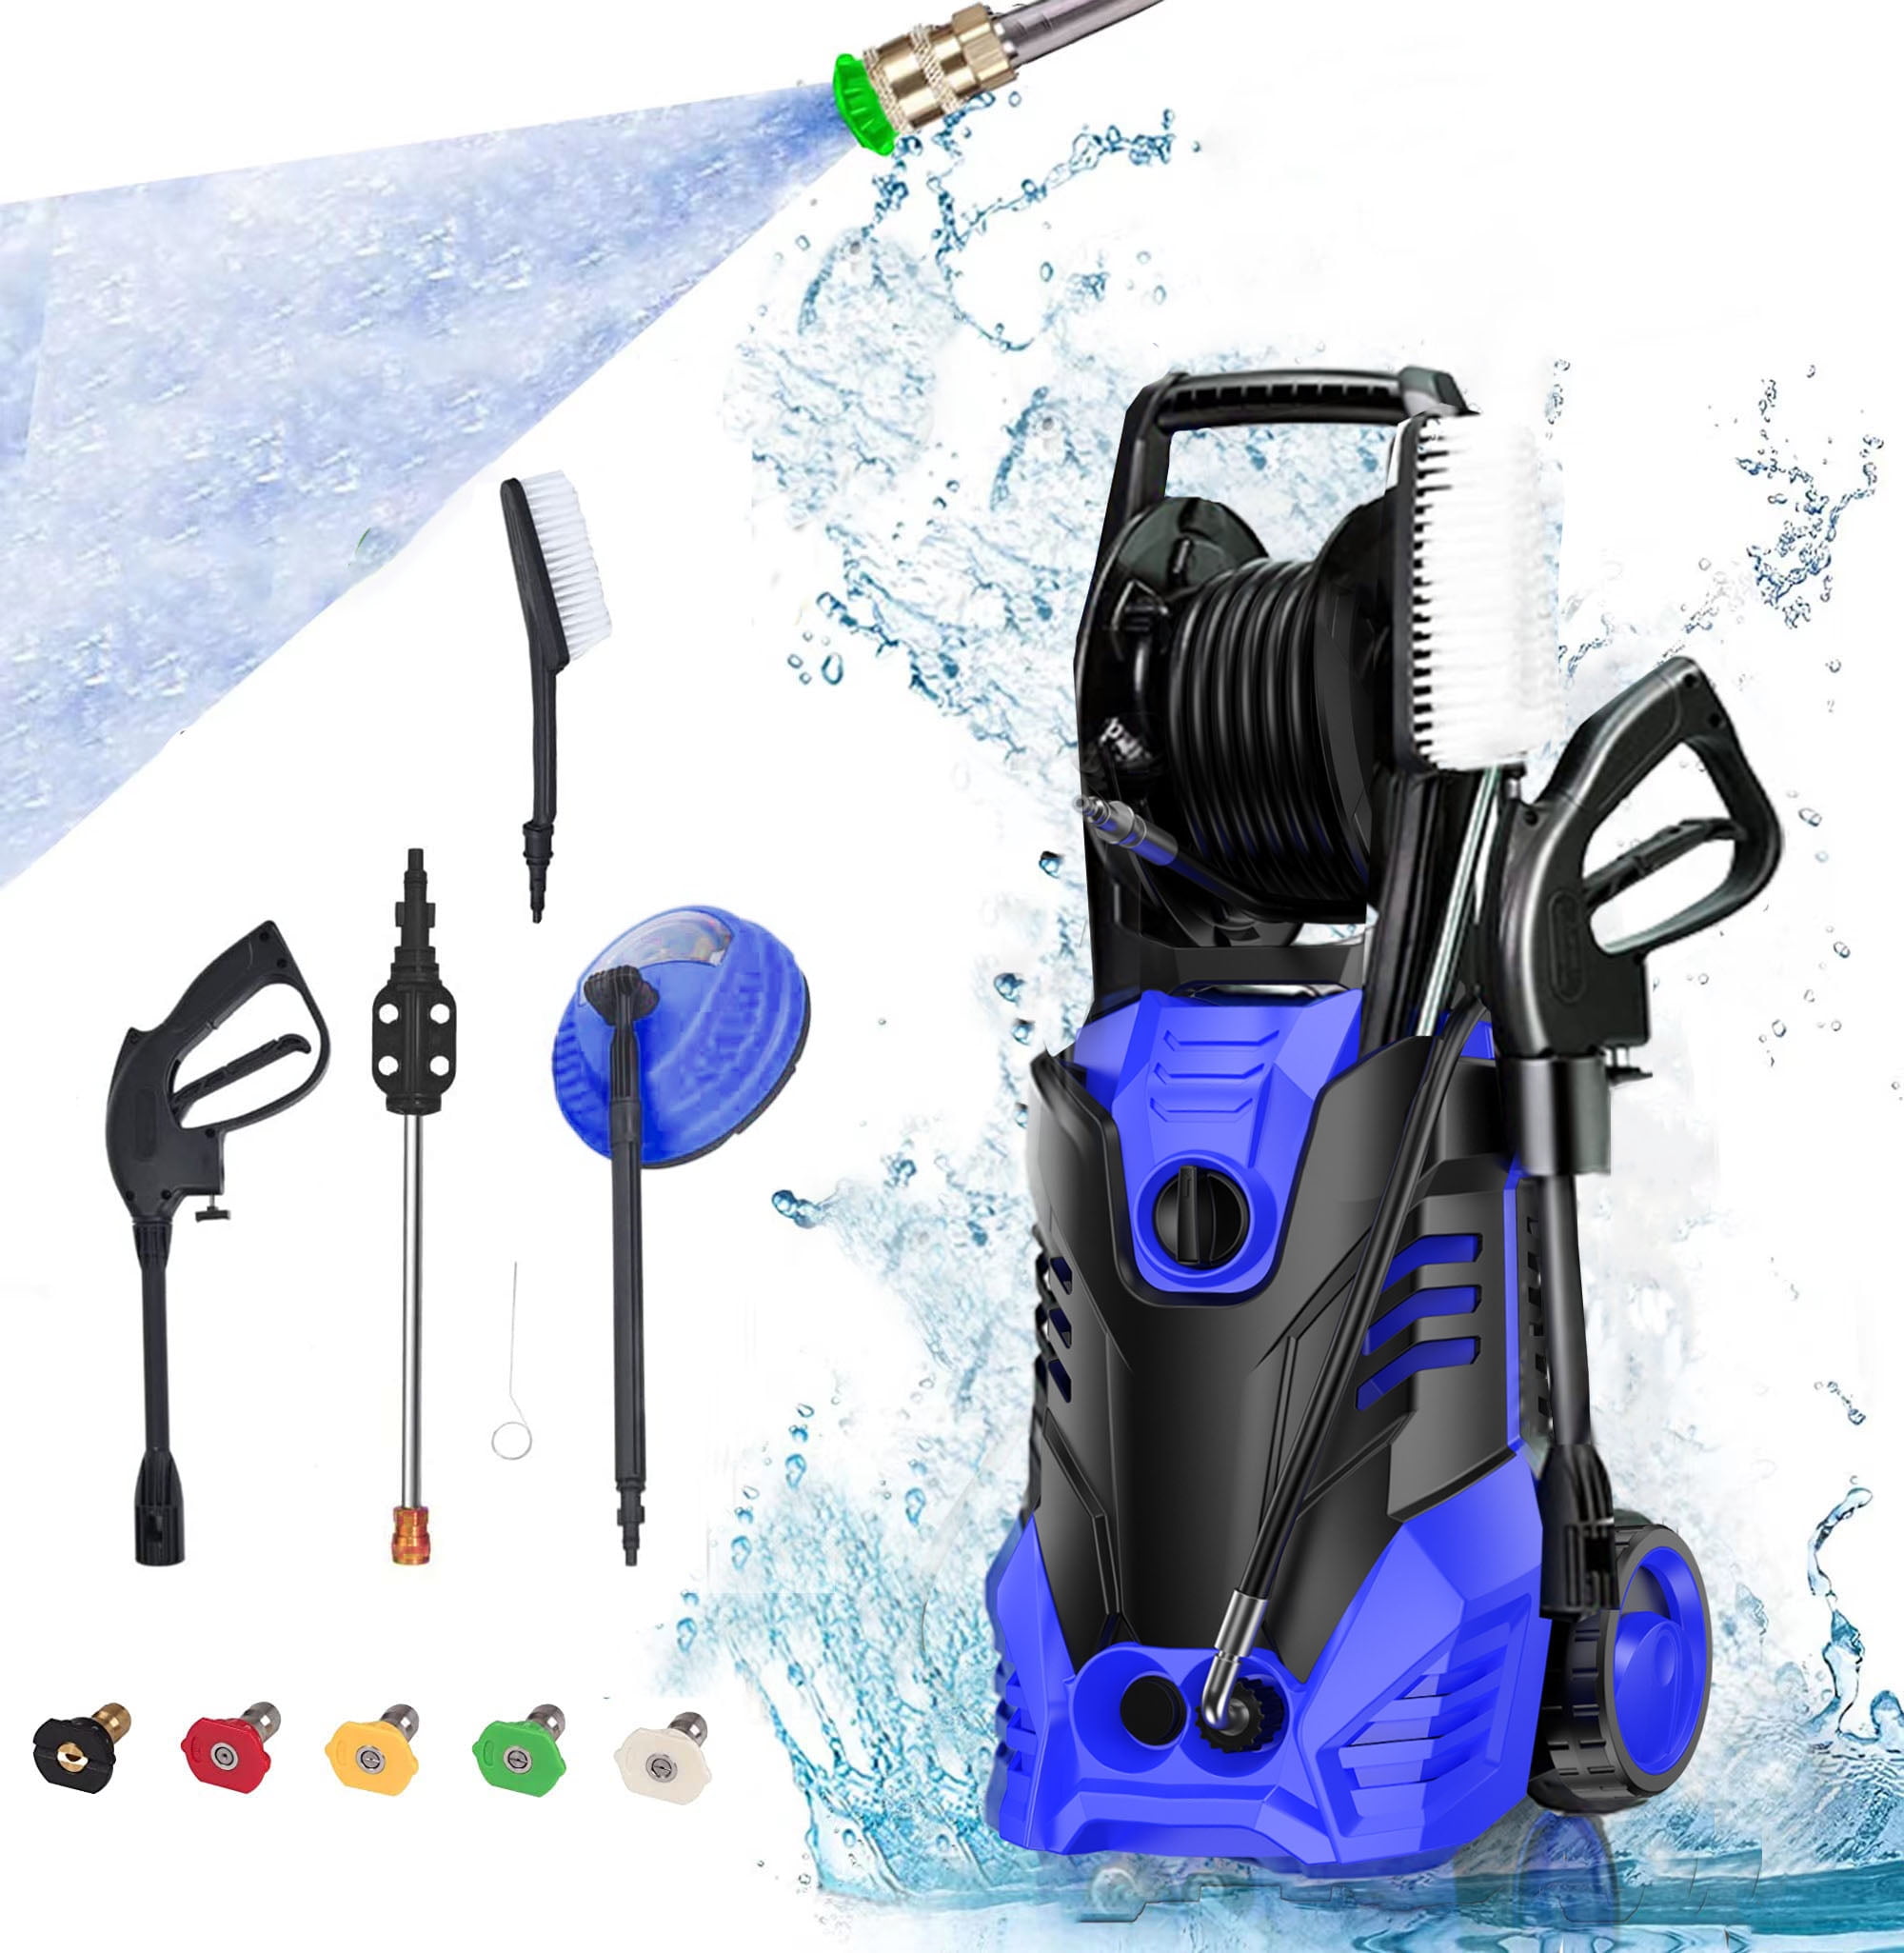 Grandfalls Pressure Washer PRO, Electric Wall Mount Pressure Washer,  Retractable Power Washer Reel Wall Mounted, Power Corded, Perfect for  Cleaning